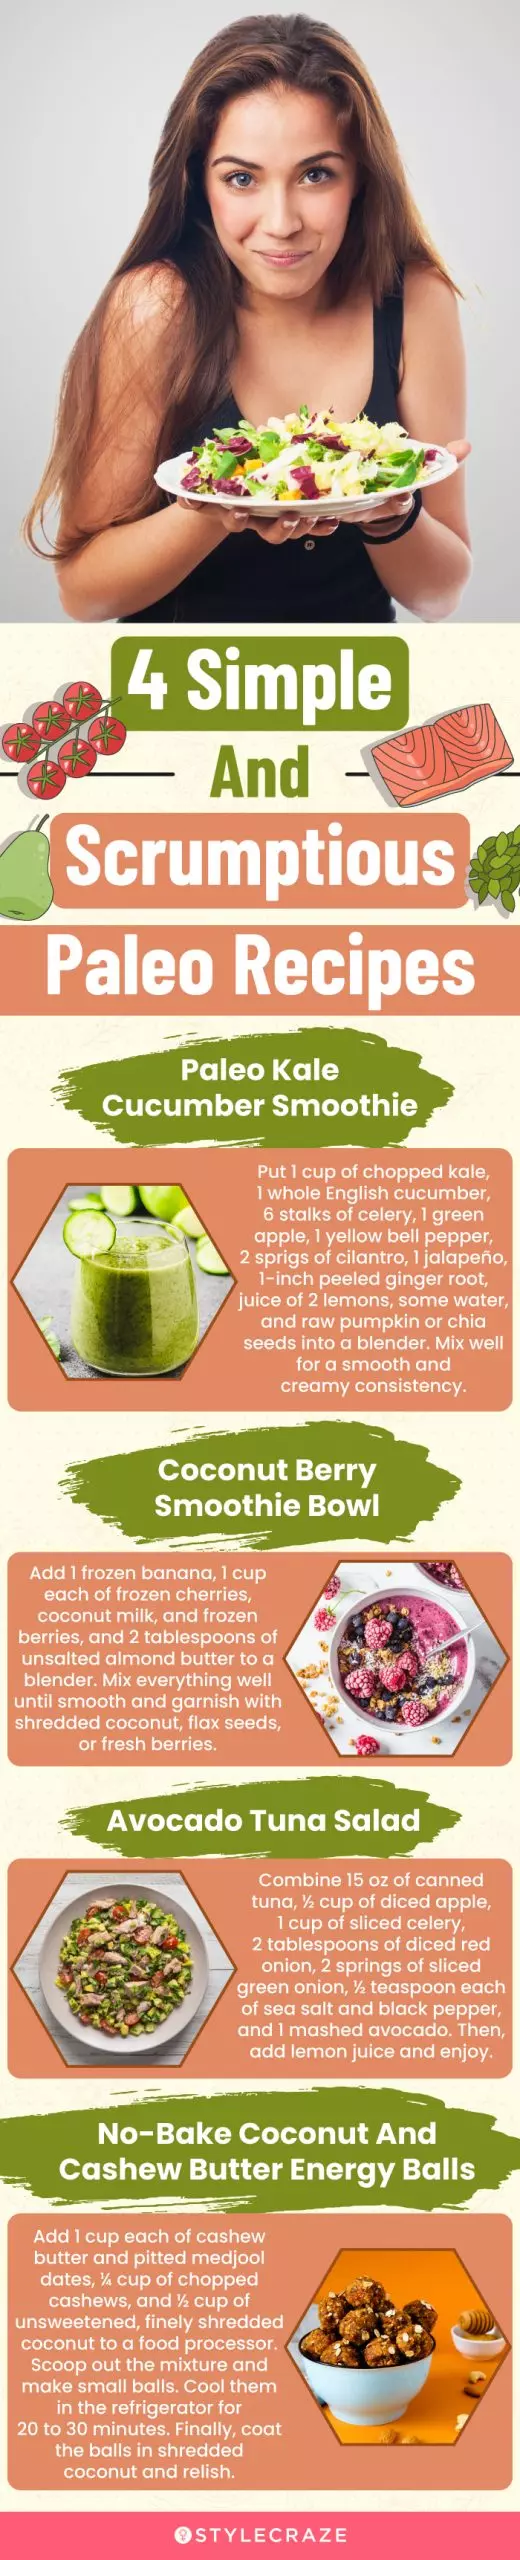 4 simple and scrumptious paleo recipes (infographic)